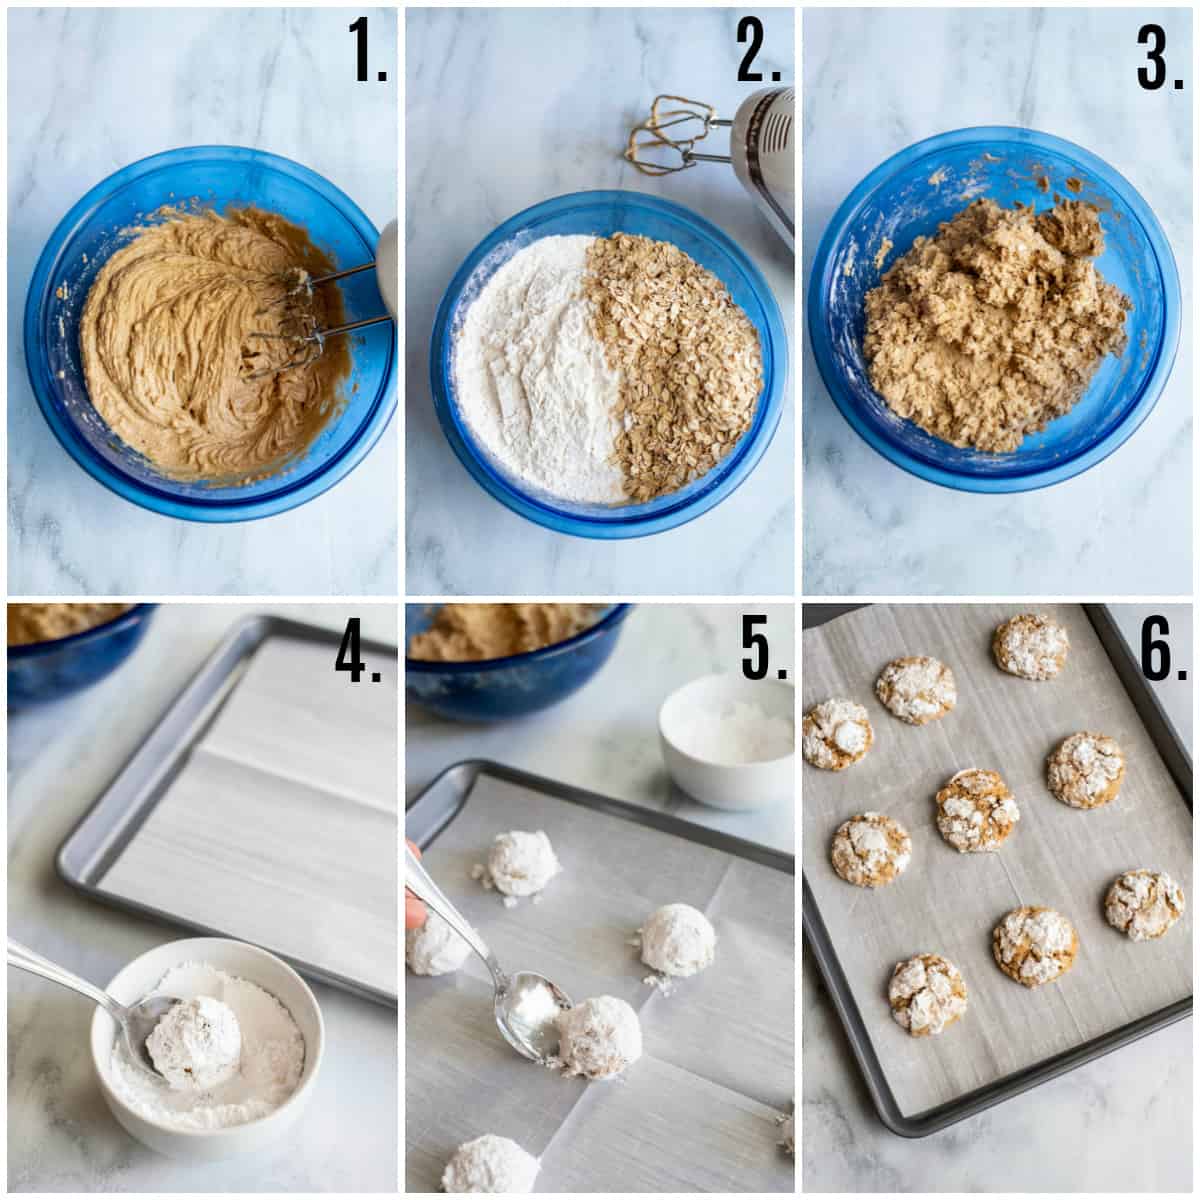 Step by step photos on how to make Crinkle Cookies